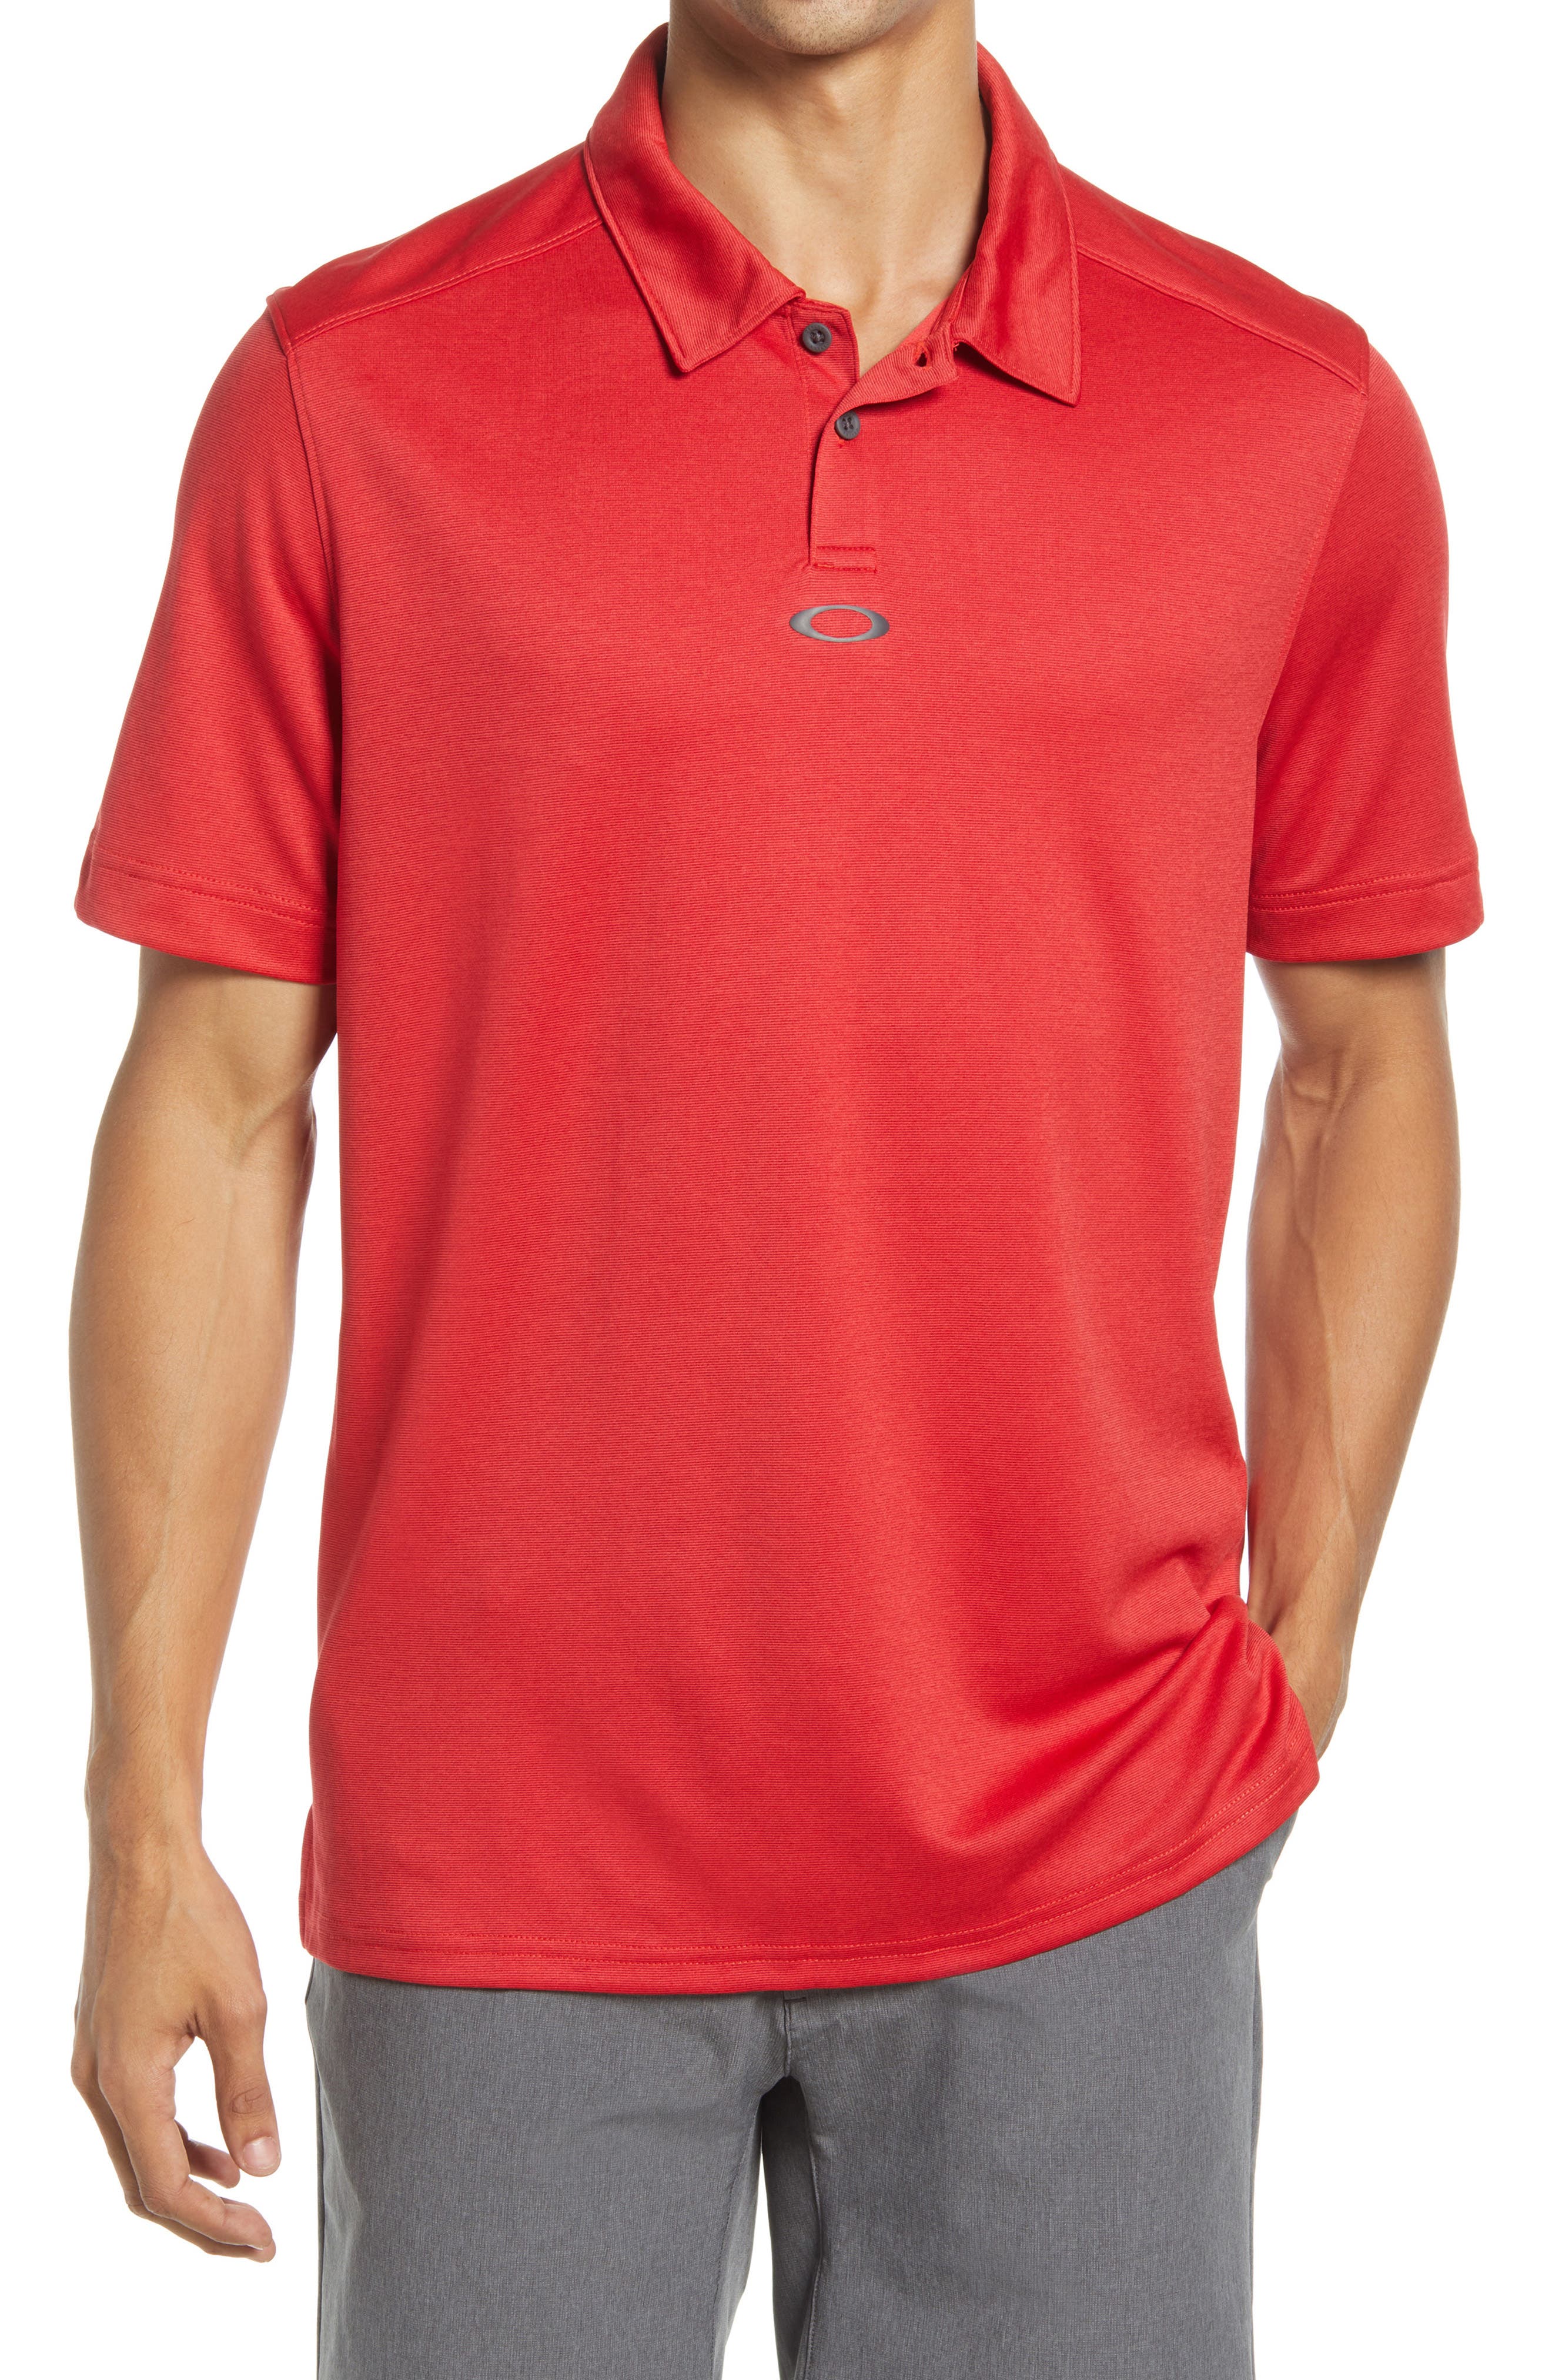 polo shirts for men red